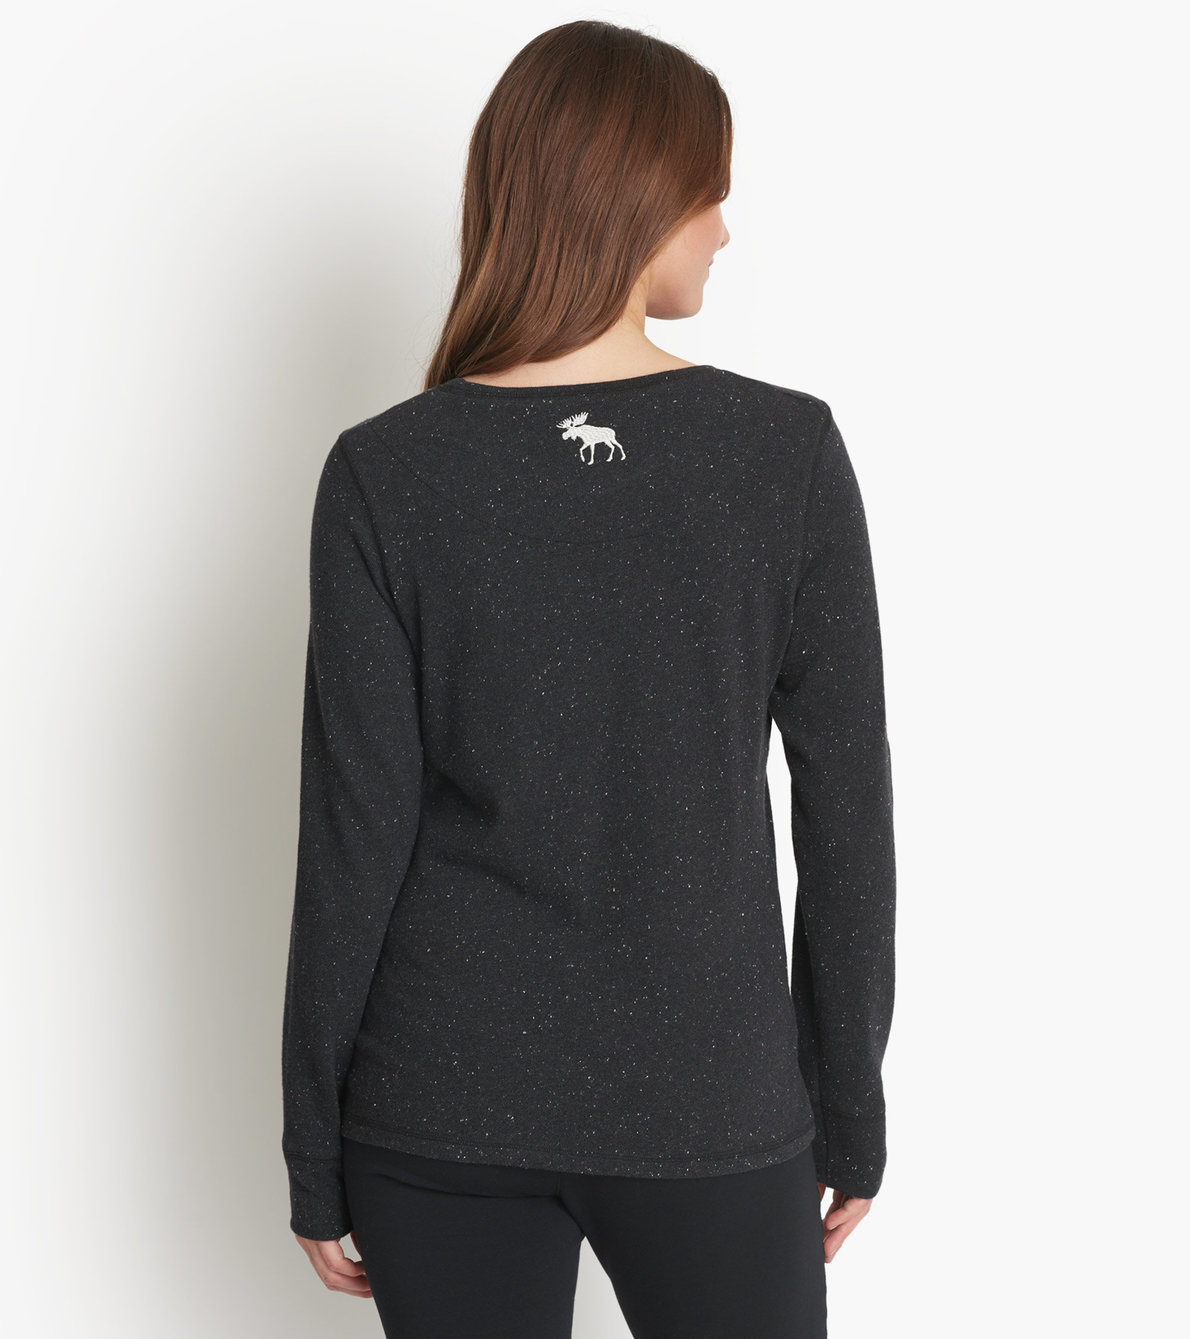 View larger image of Women's Heritage Long Sleeve Tee in Black 